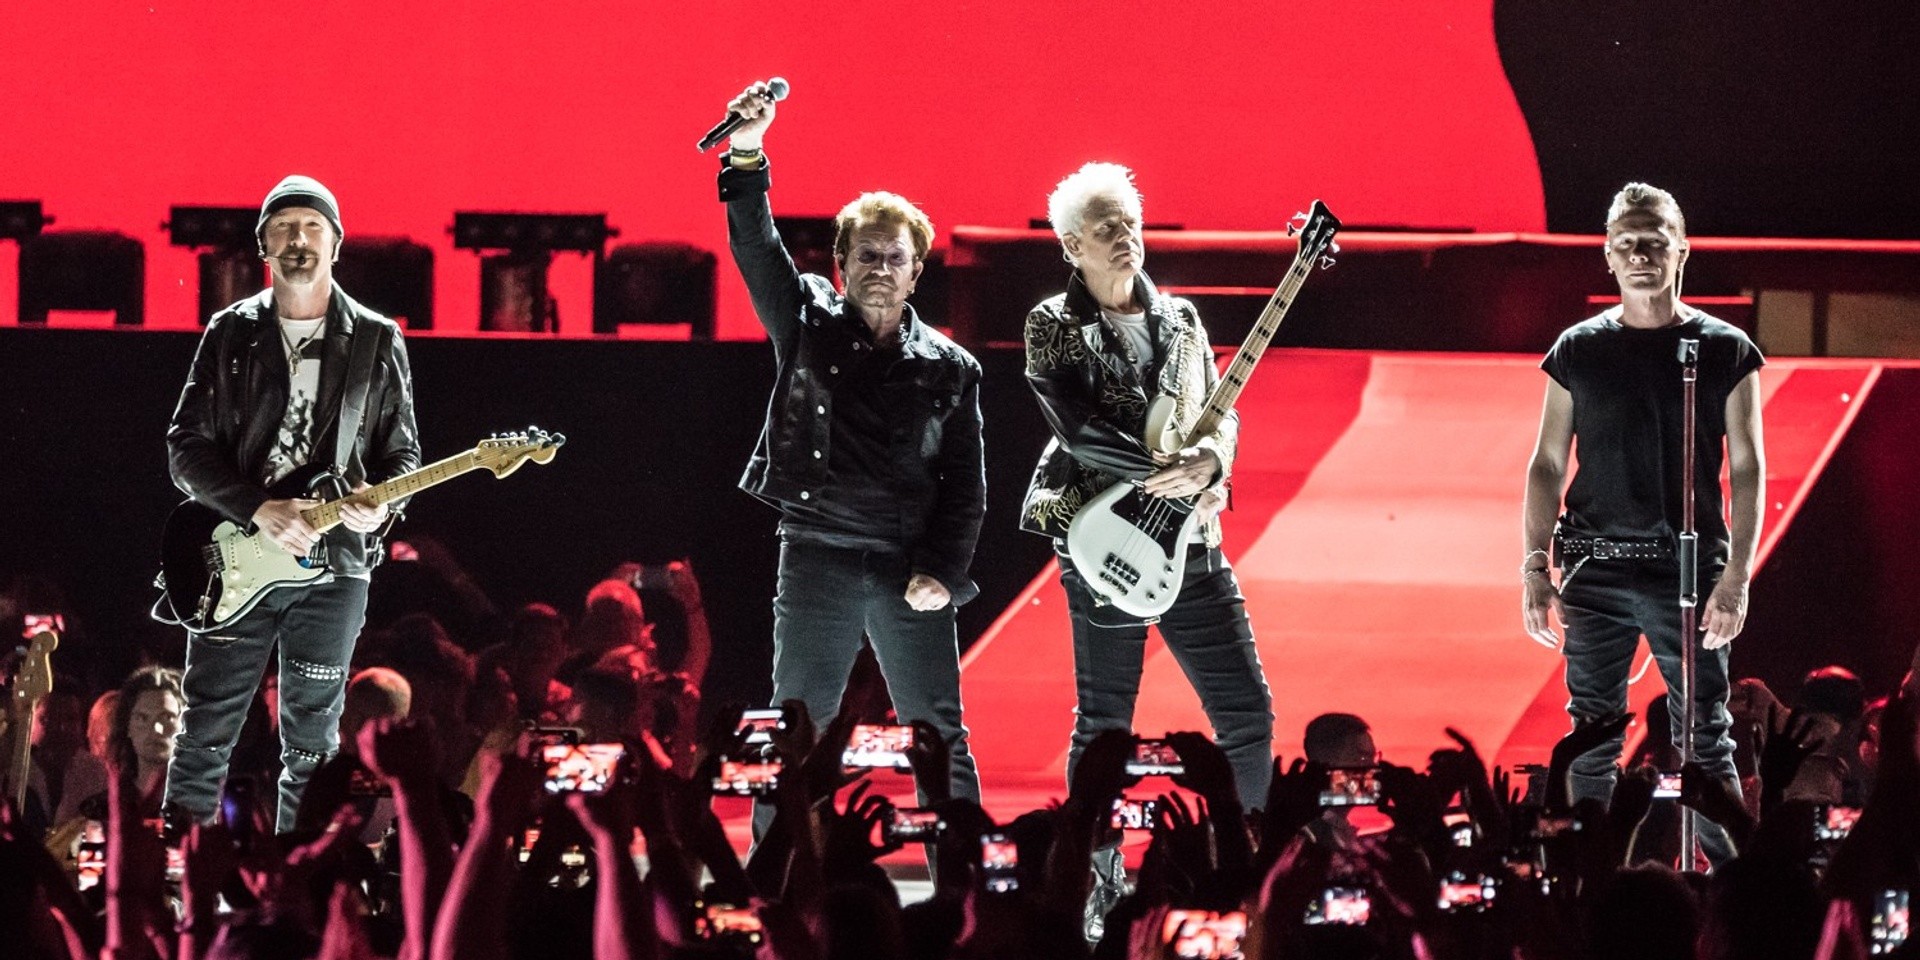 Twitter reacts to U2's upcoming Singapore Show